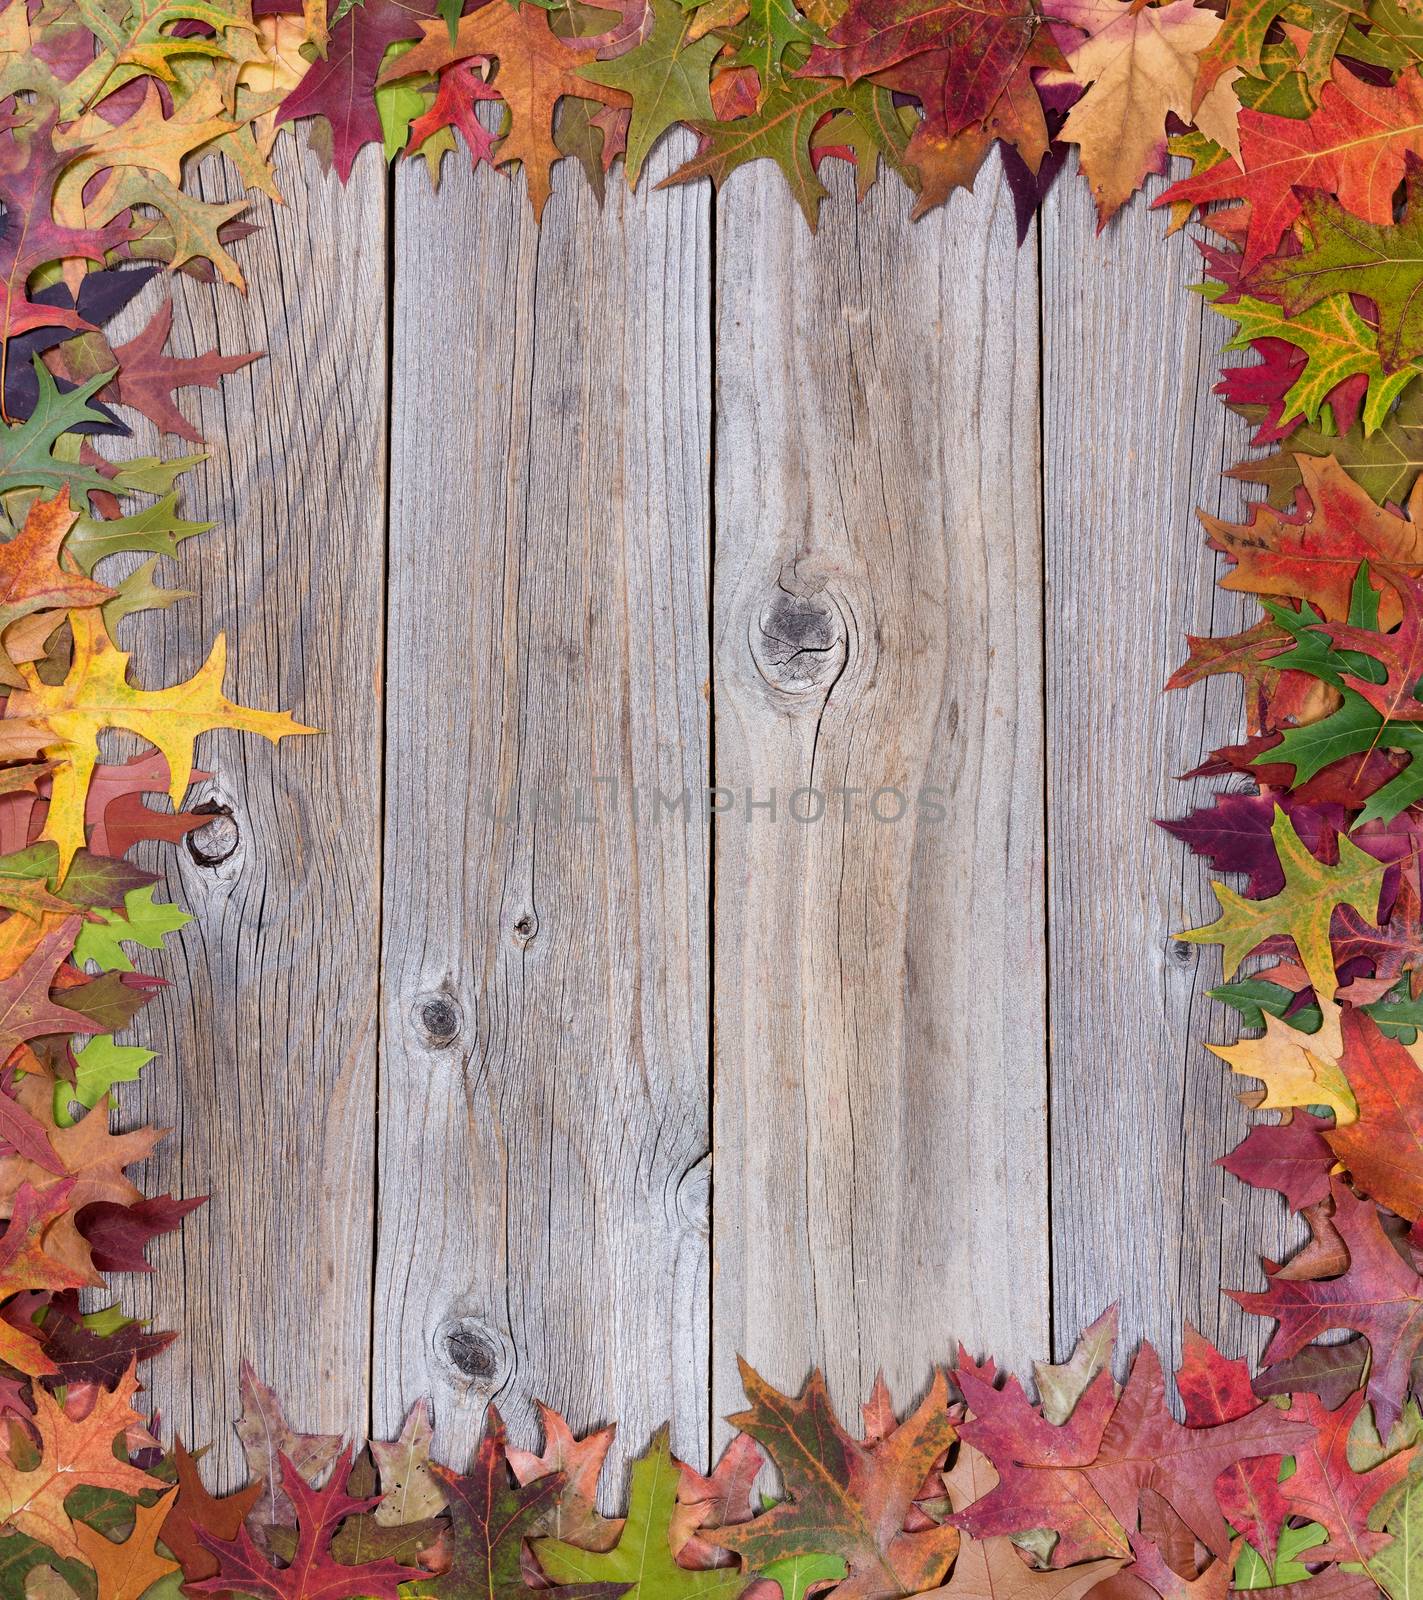 Early autumn leaves on rustic wooden boards by tab1962